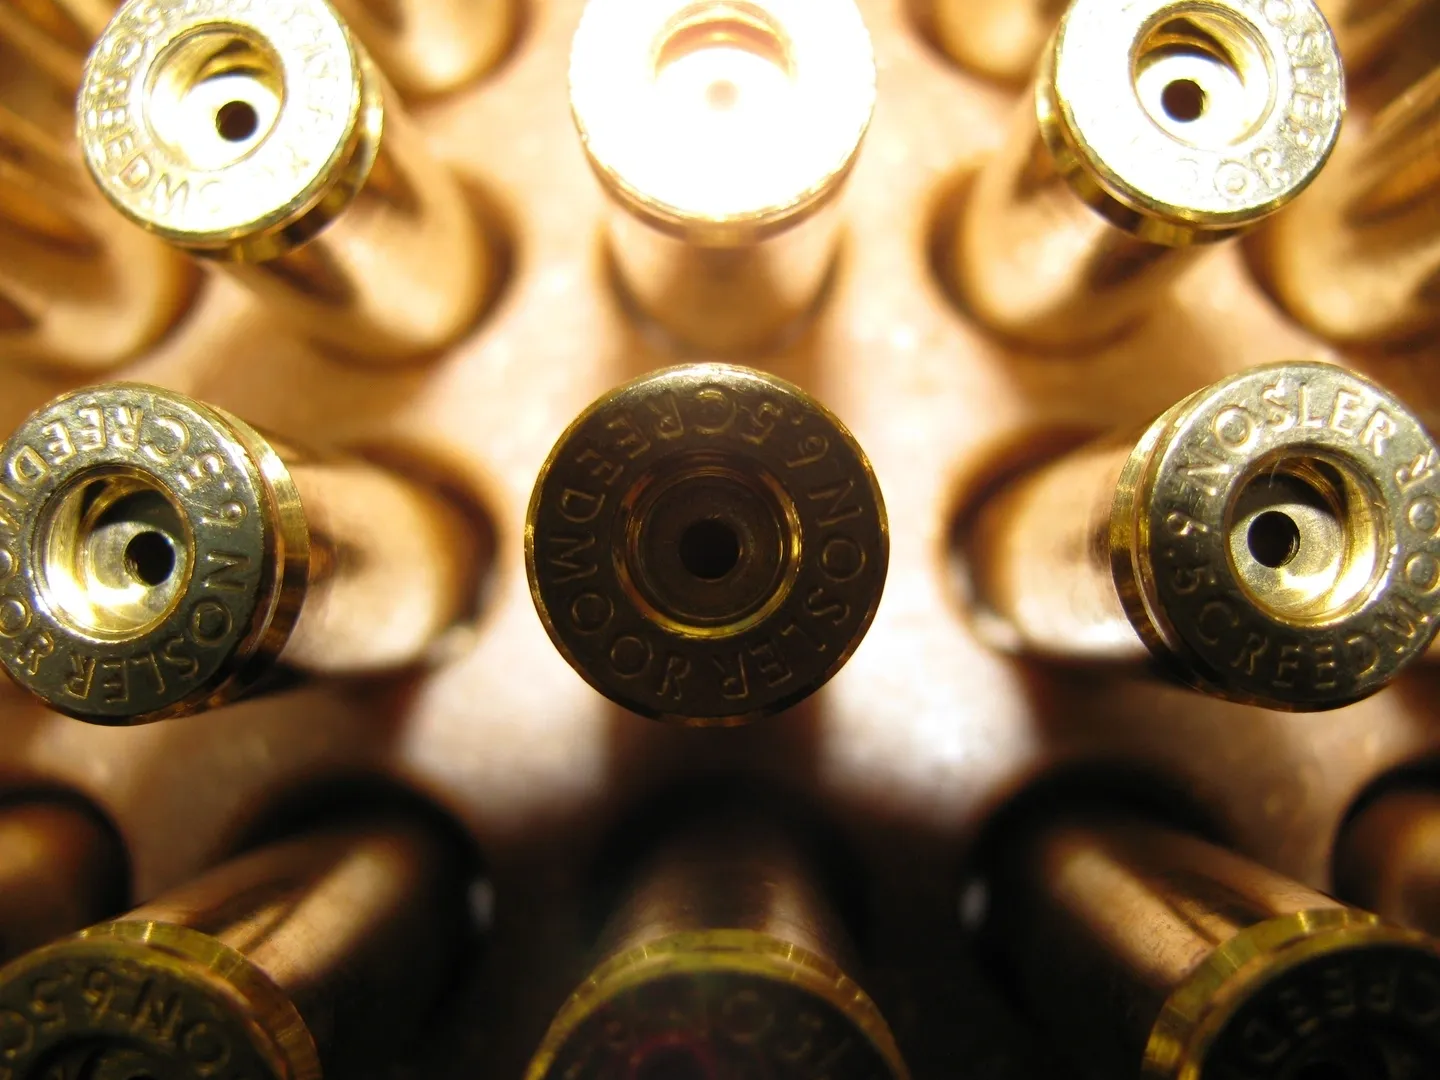 A close up of many bullet casings